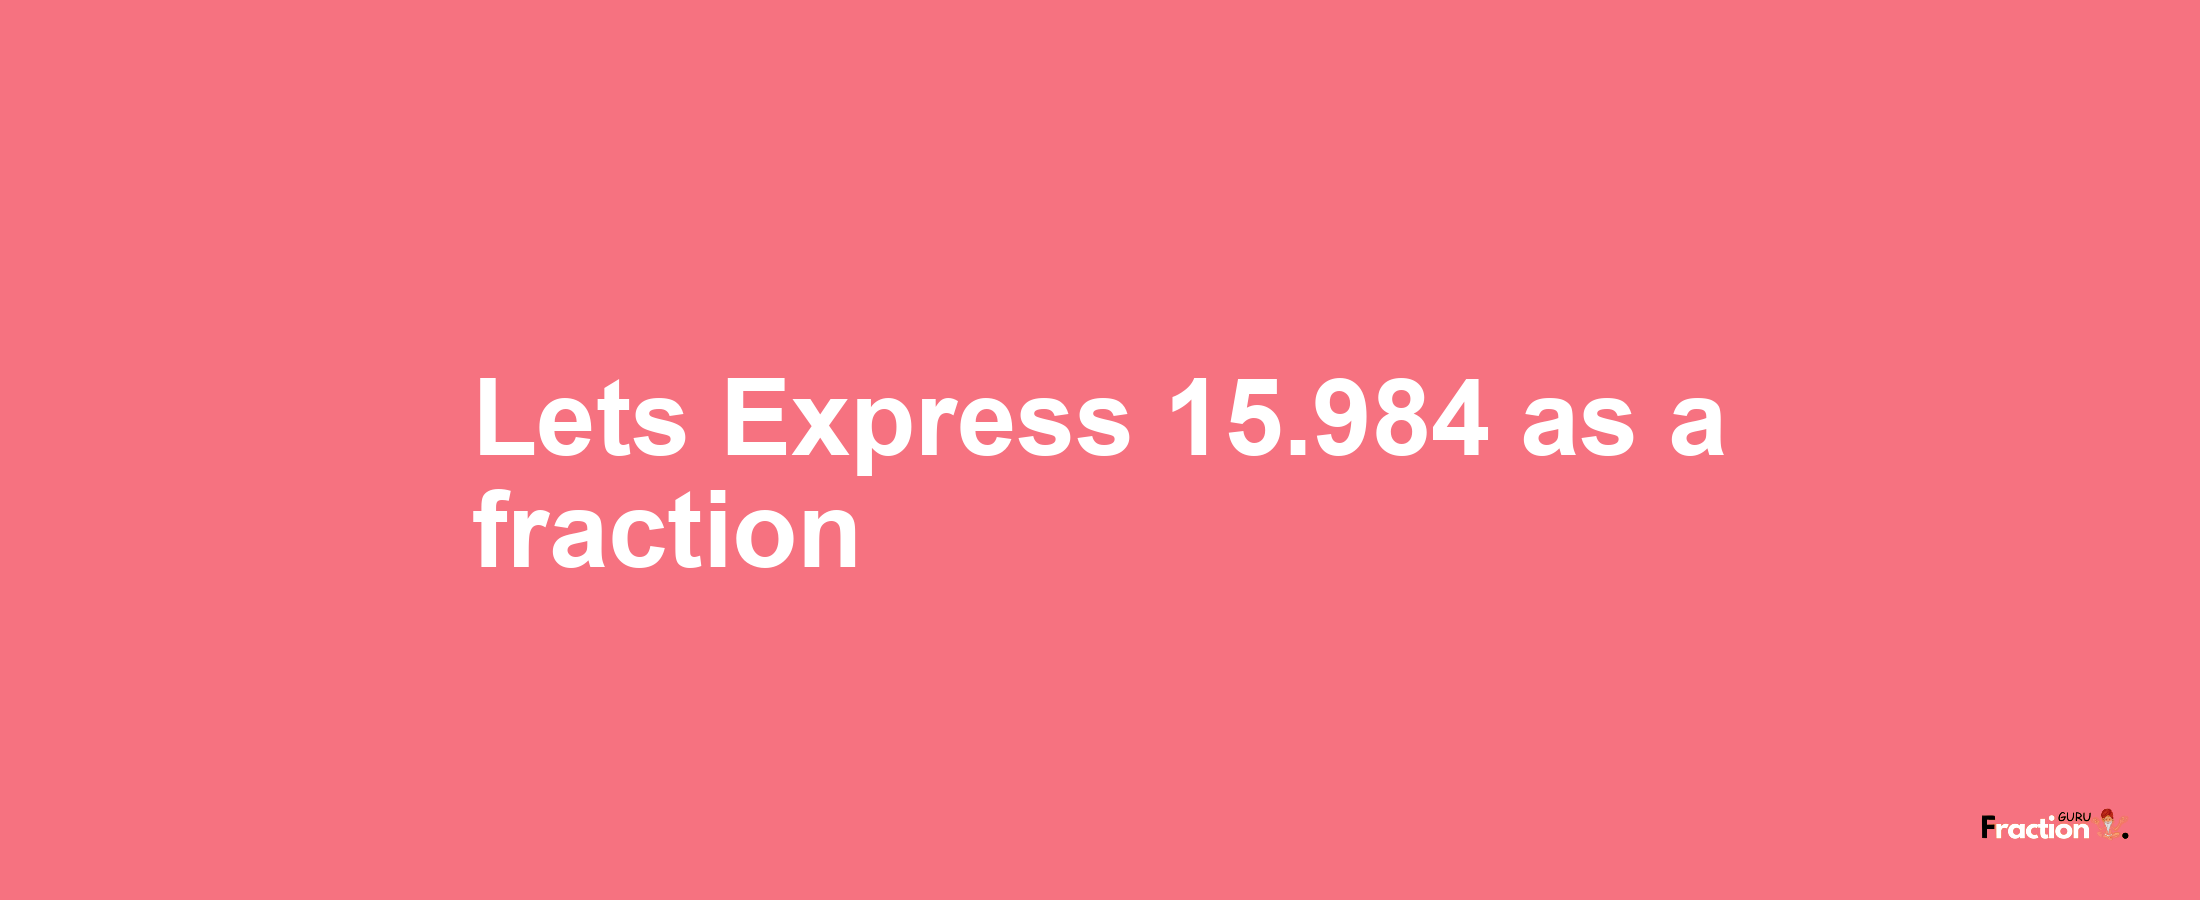 Lets Express 15.984 as afraction